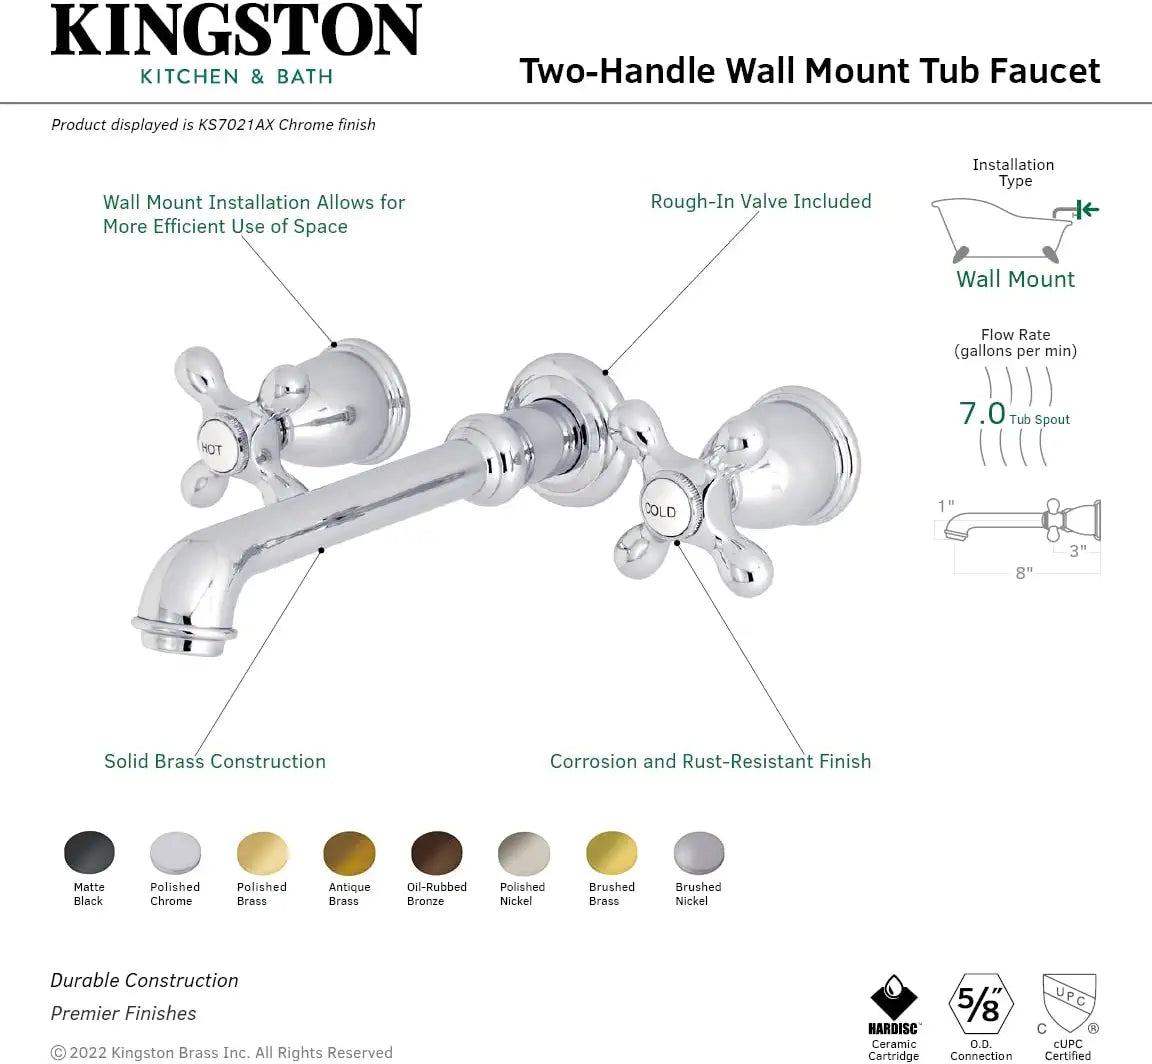 Kingston Brass KS7025AX English Country Roman Tub Faucet, 10-7/16 Inch in Spout Reach, Oil Rubbed Bronze